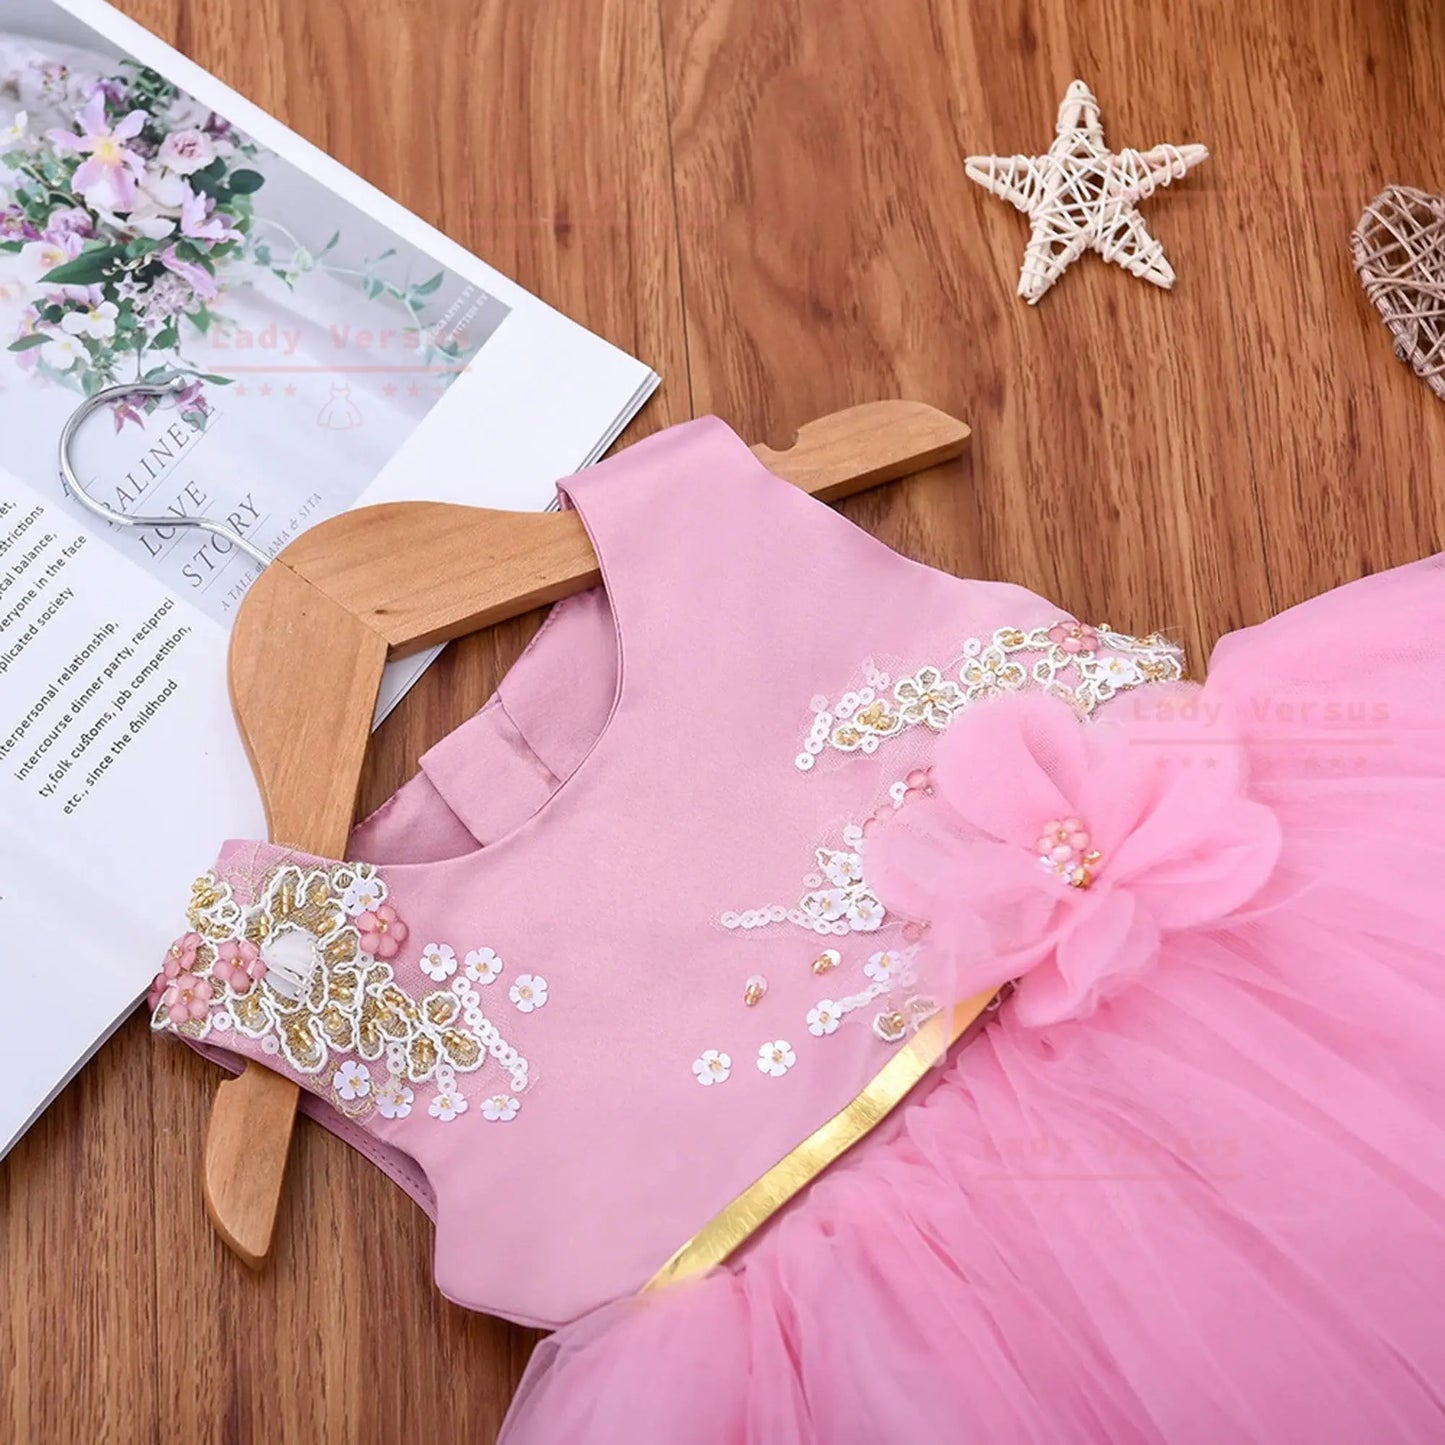 Baby Girl Party Dress / Girl Christening Gown/ Girl Baptism Outfit /birthday princess gown /toddler cake smash party/ 1st birthday party